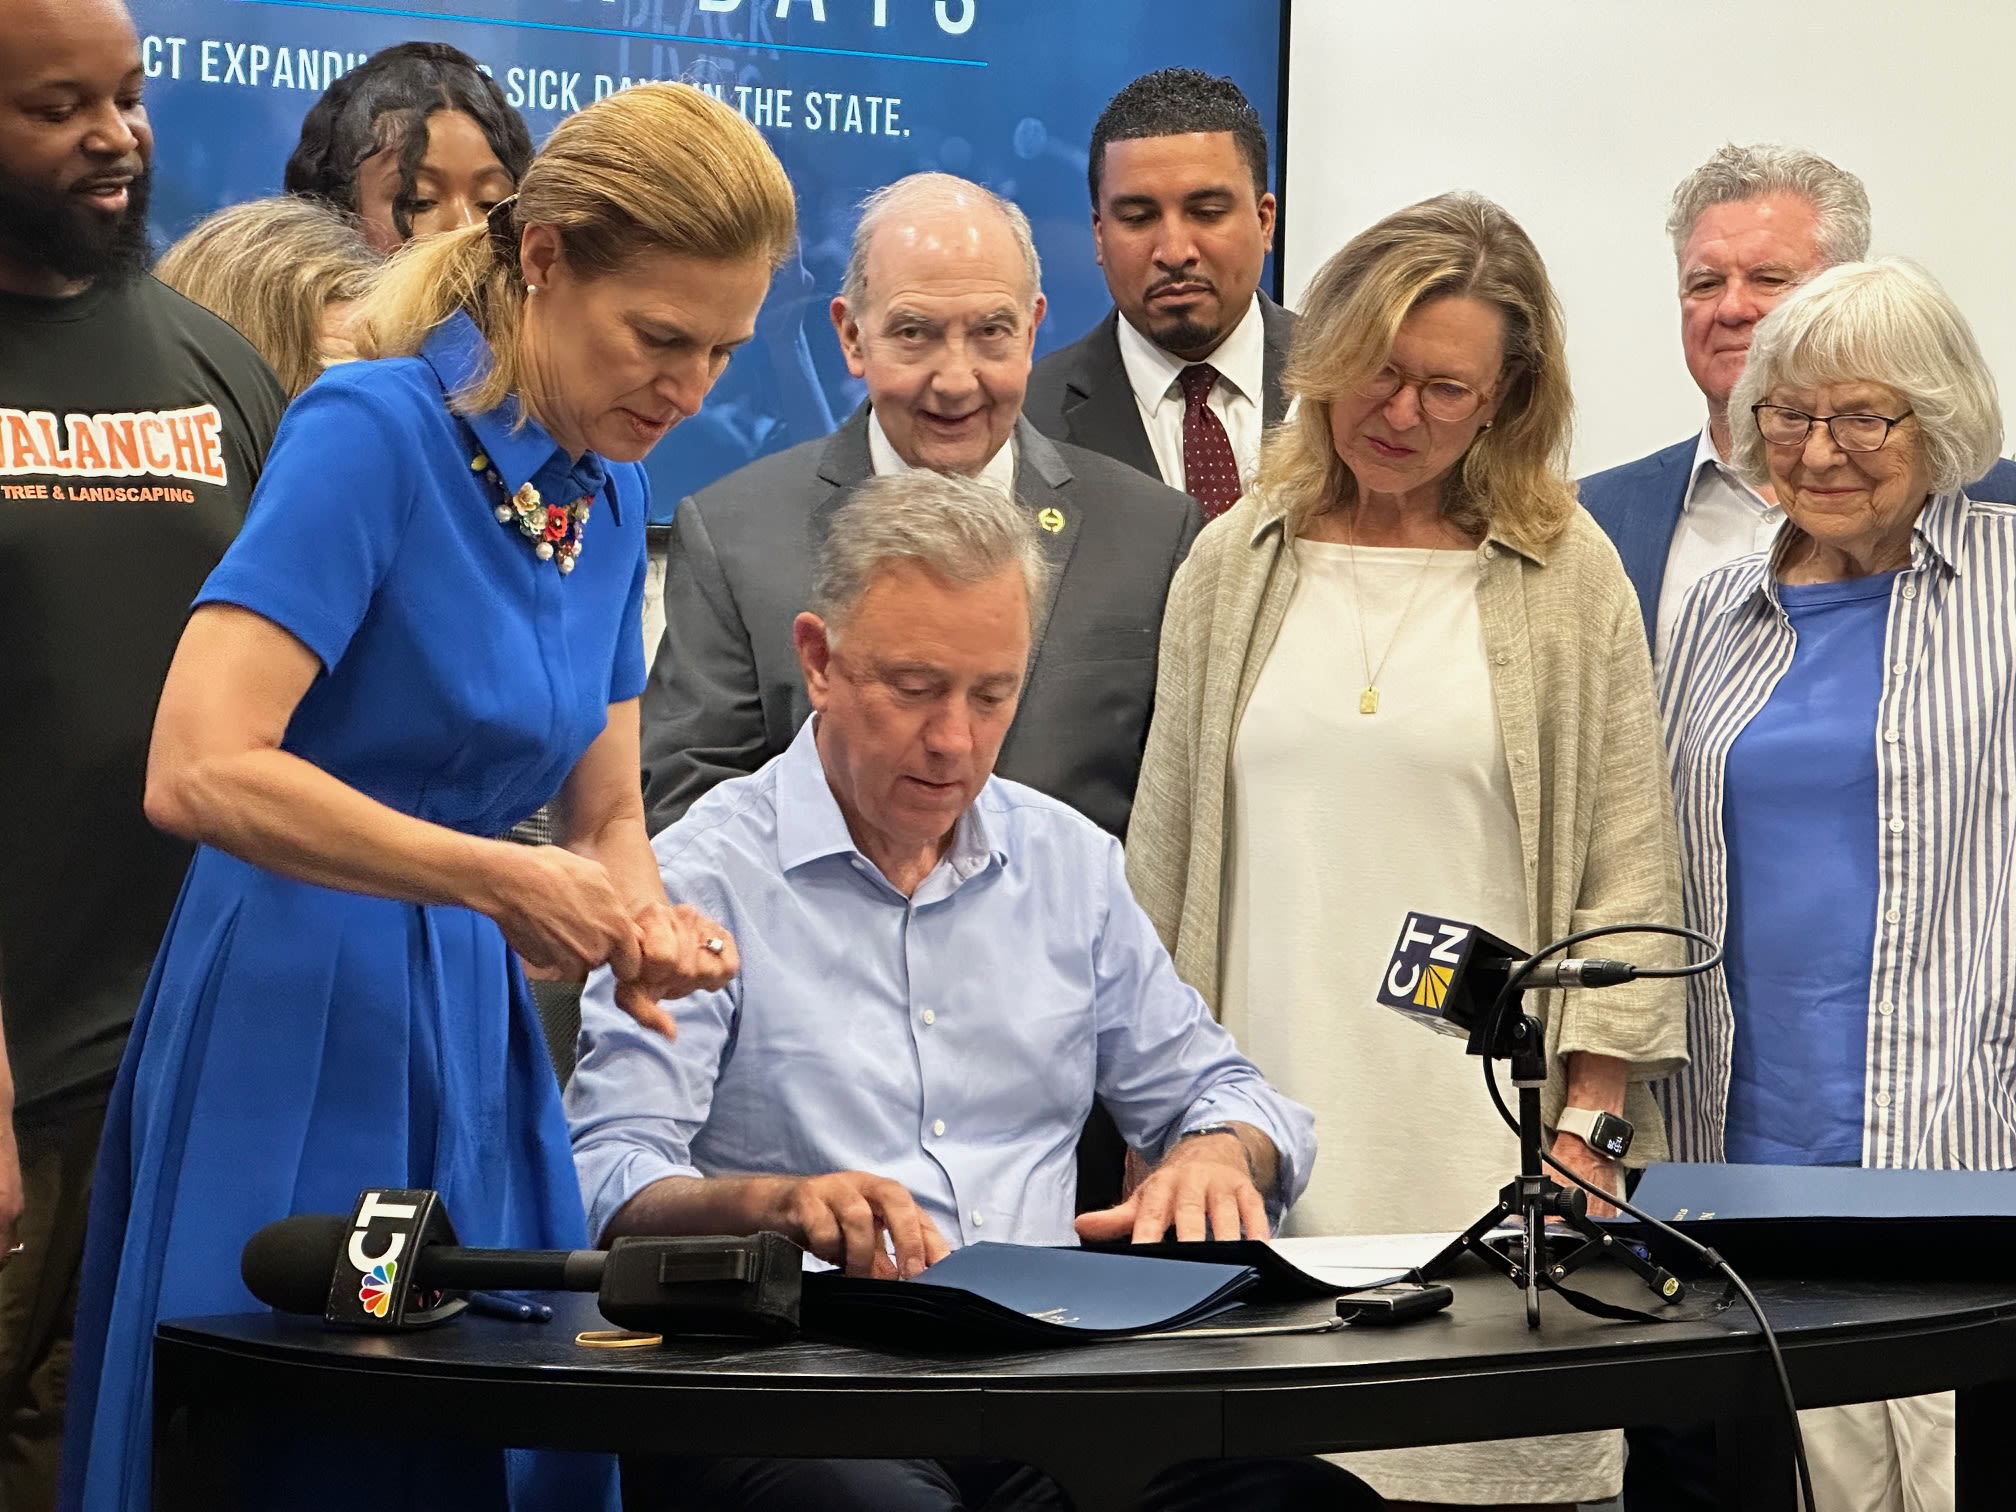 Lamont signs CT paid sick leave law; ceremony marks wedge issue